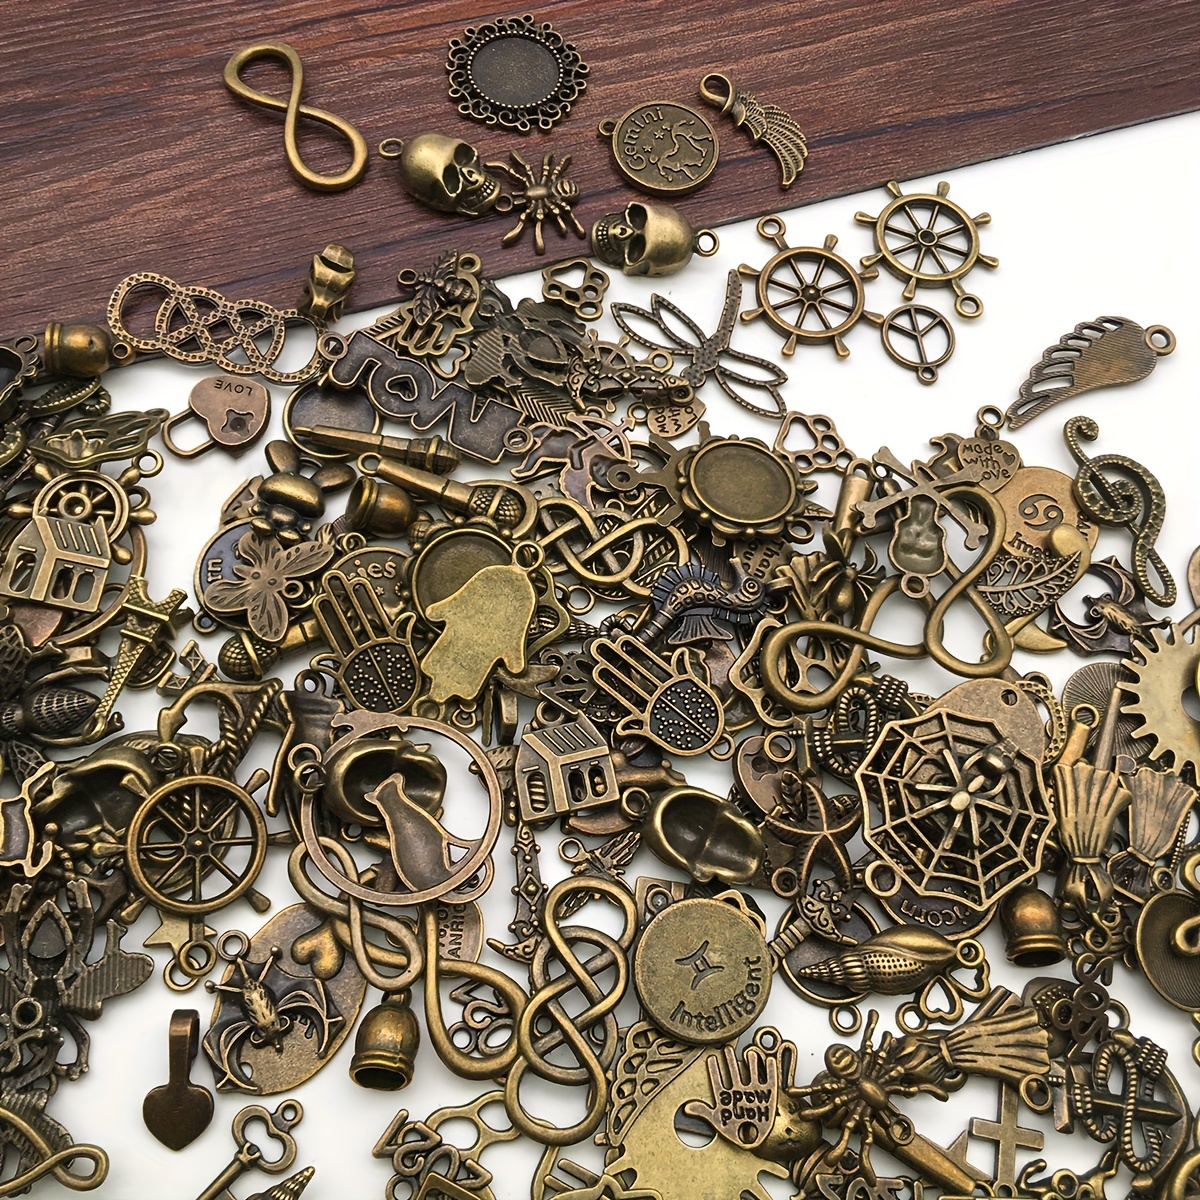 Assorted Key Charms and Pendants in Antiqued Bronze Finish 10 Charms / Antiqued Bronze